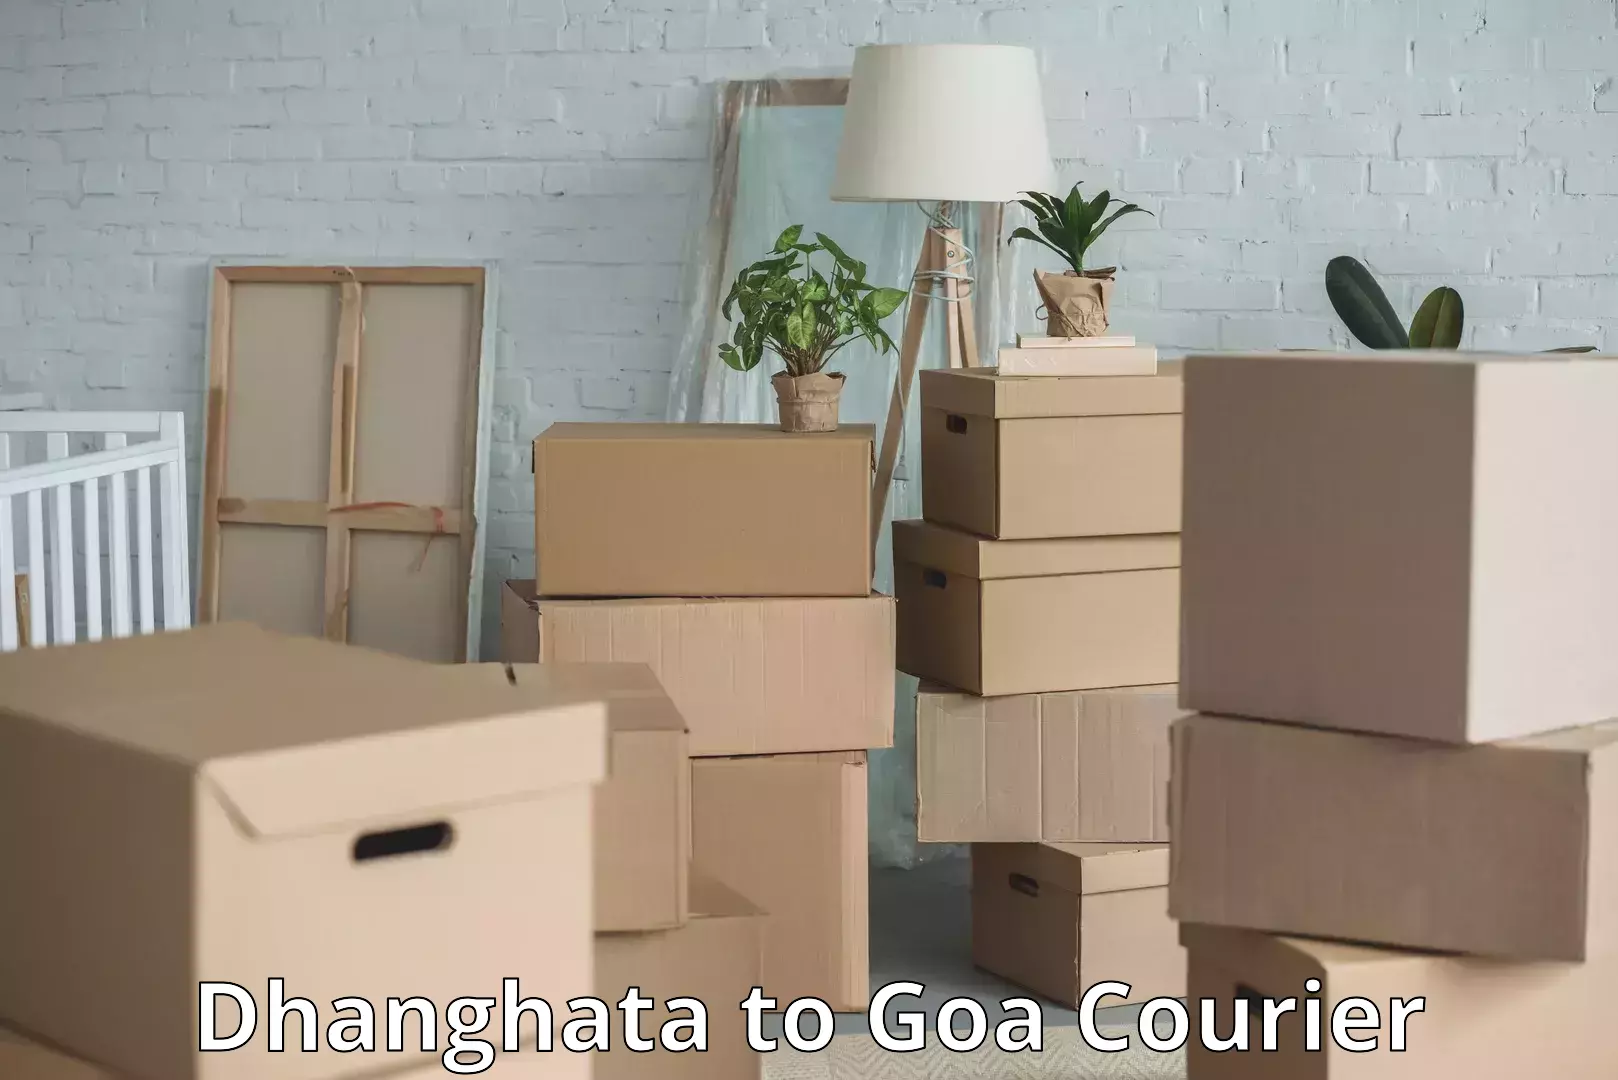 Luggage transport consultancy Dhanghata to Goa